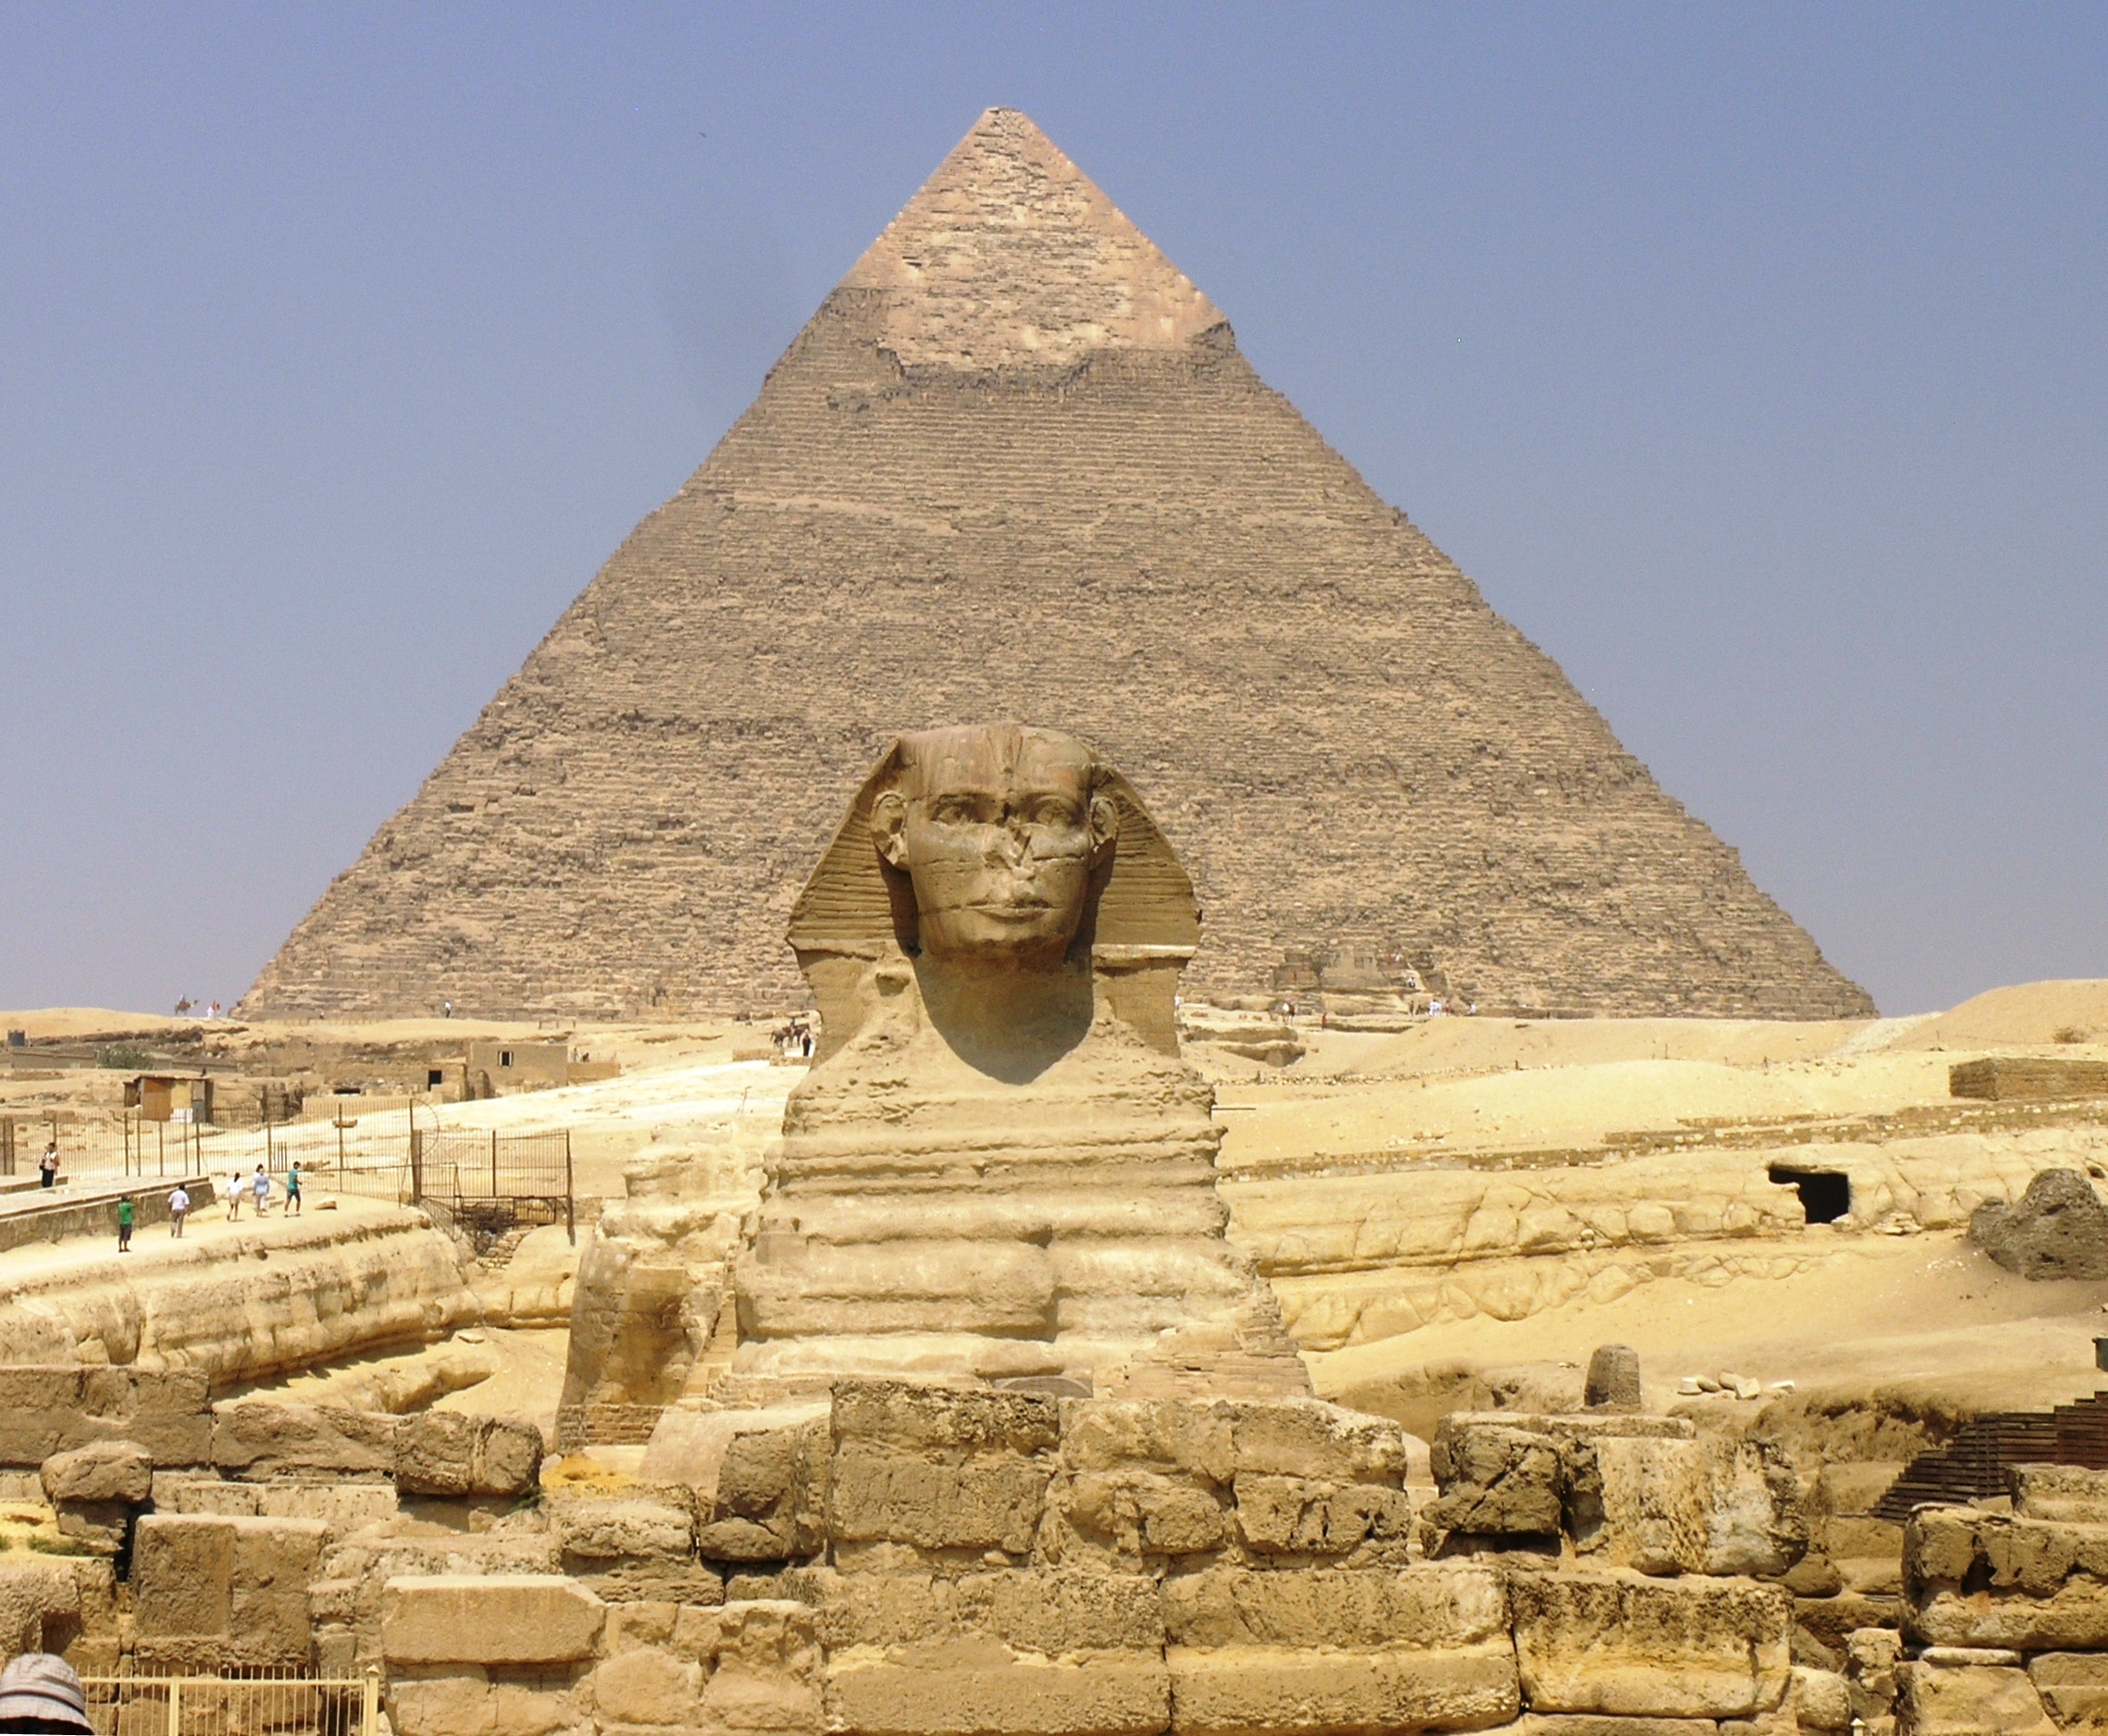 Giza Plateau - Great Sphinx With Pyramid Of Khafre In Background